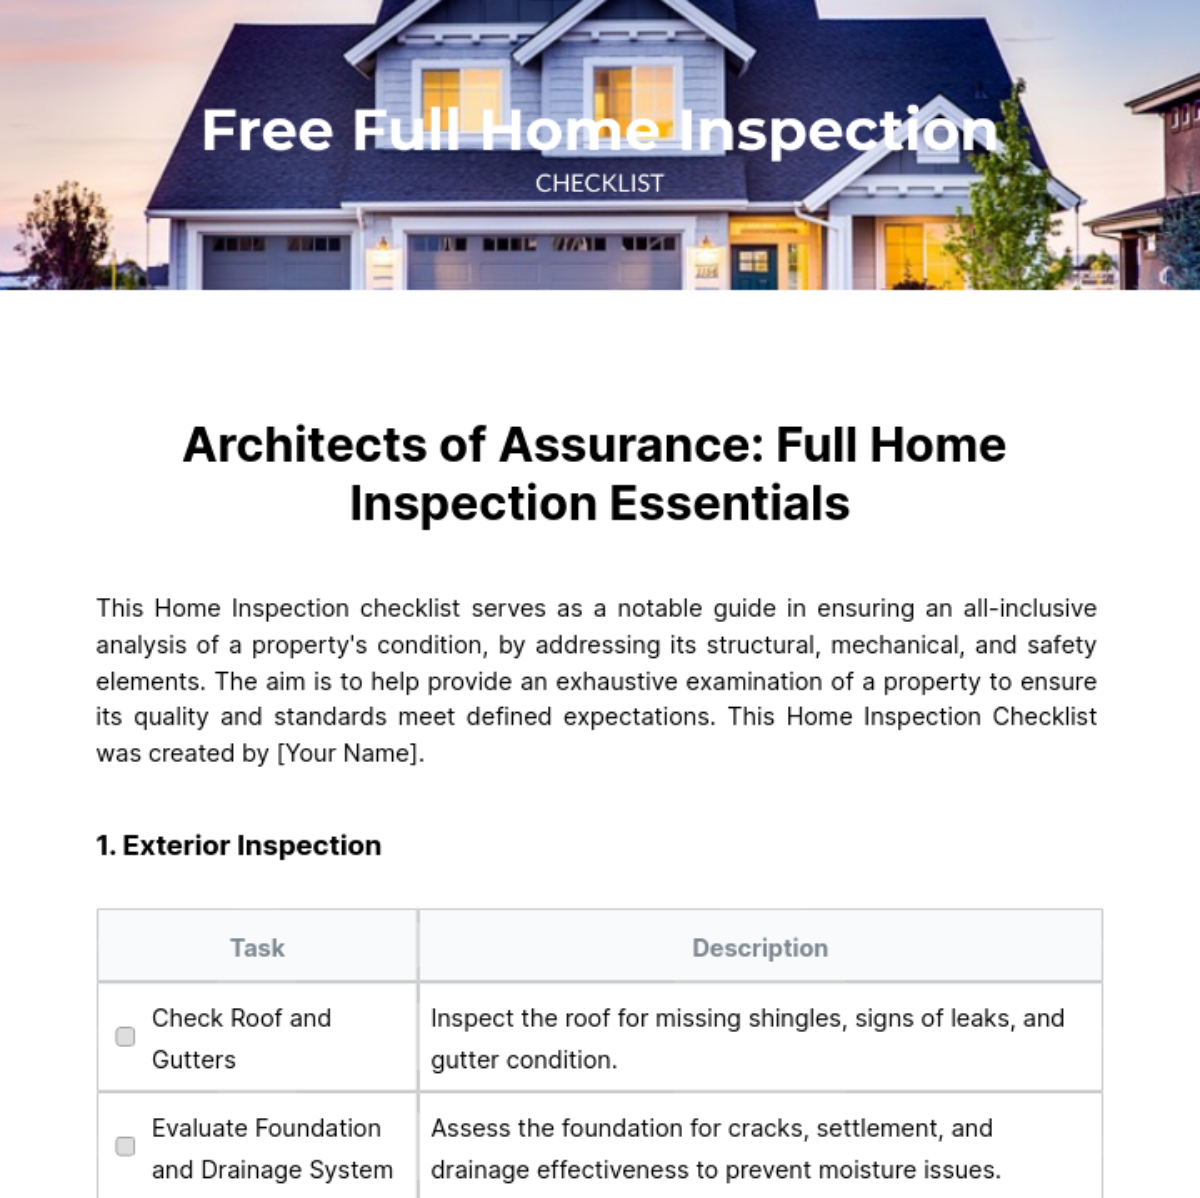 Free Full Home Inspection Checklist Template